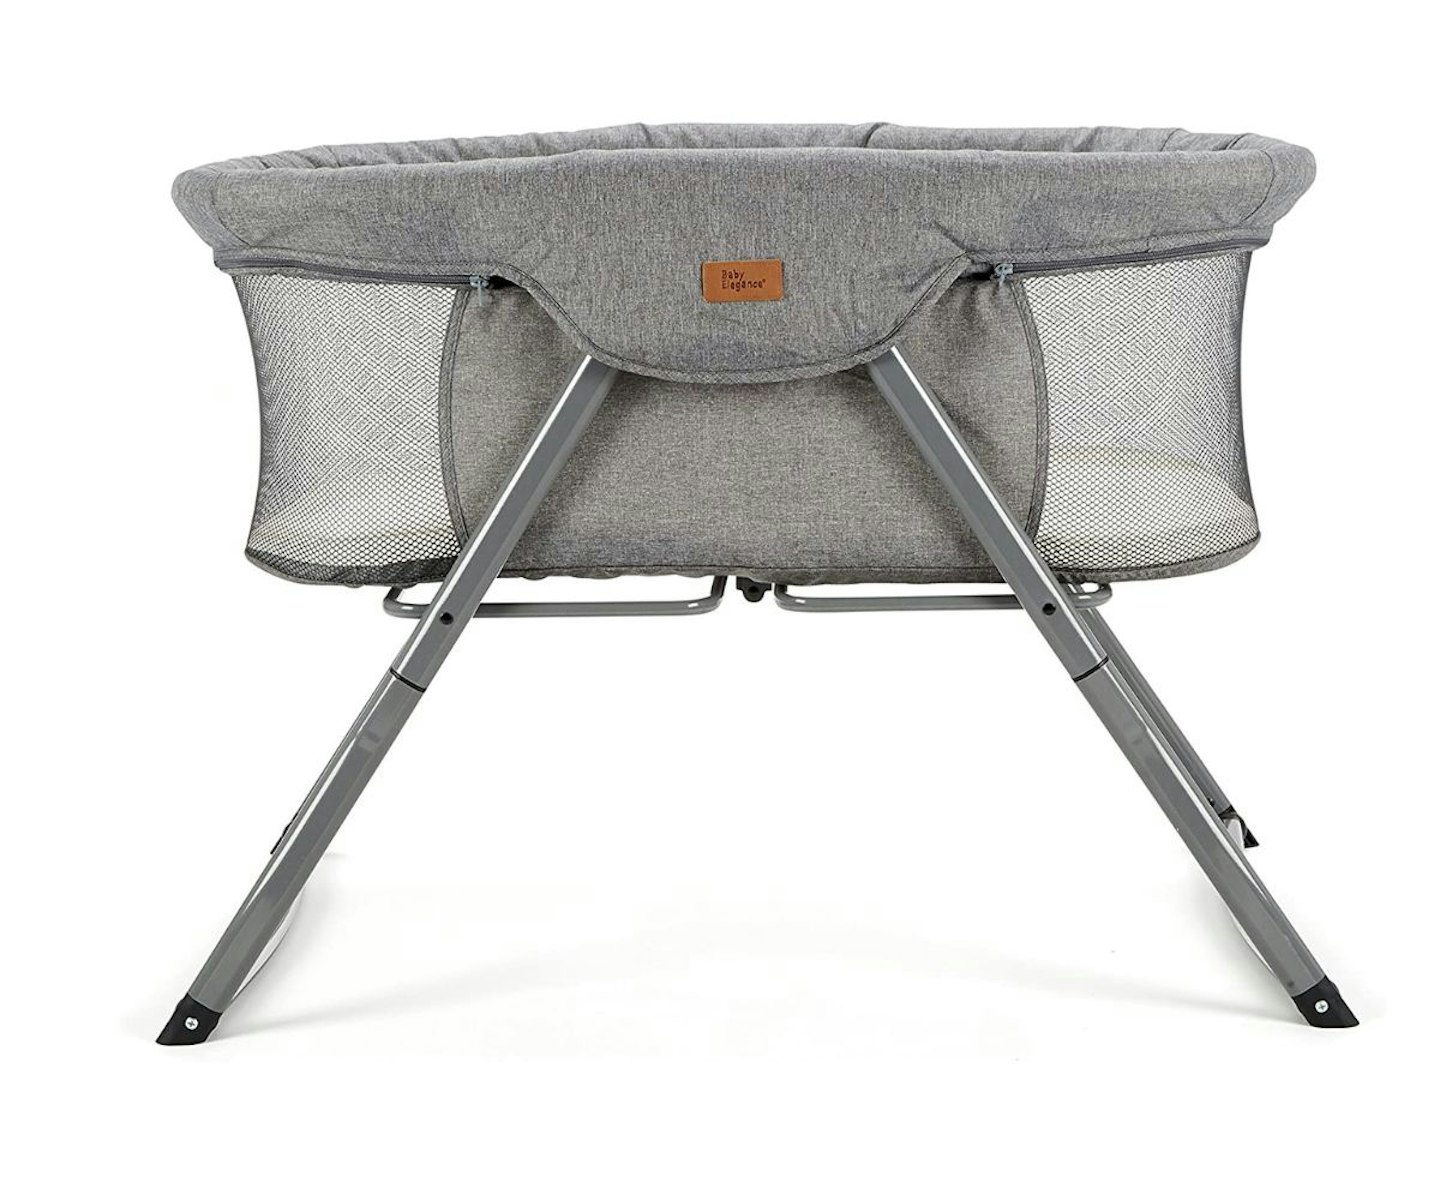 Baby Elegance 2-in-1 Travel Cot & Co Sleeper with Bassinet